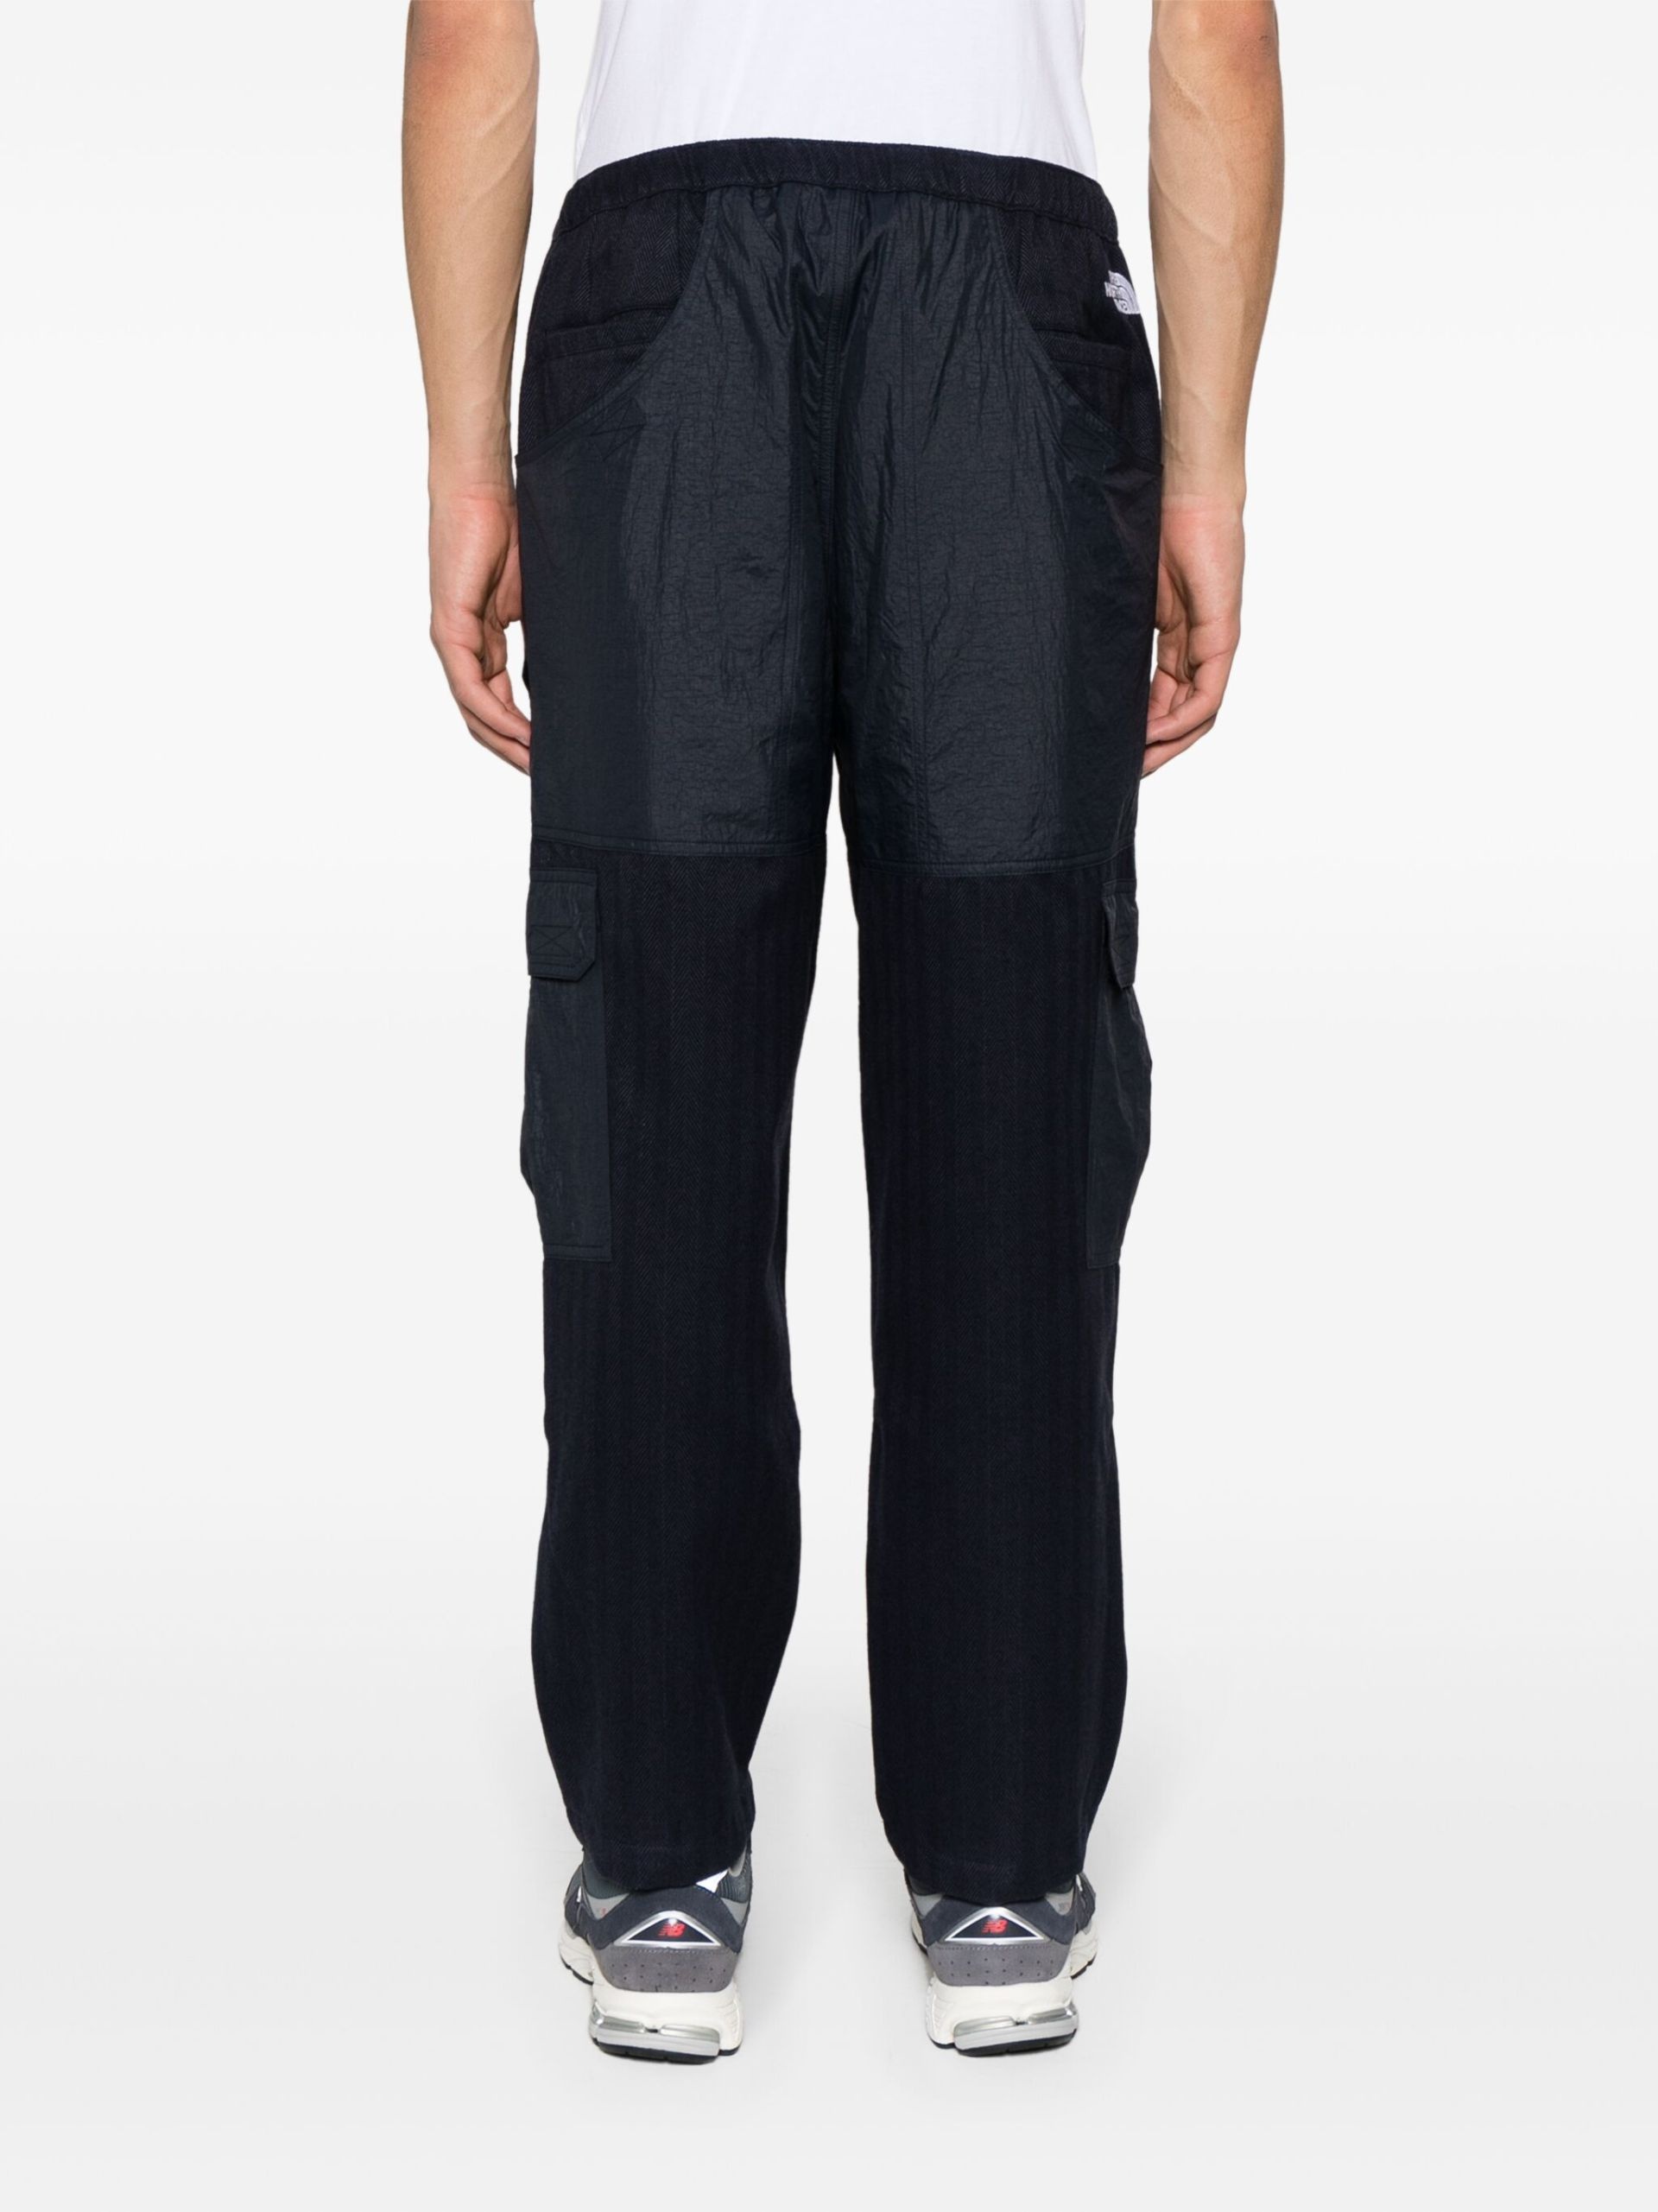 Relaxed Woven Pants Black